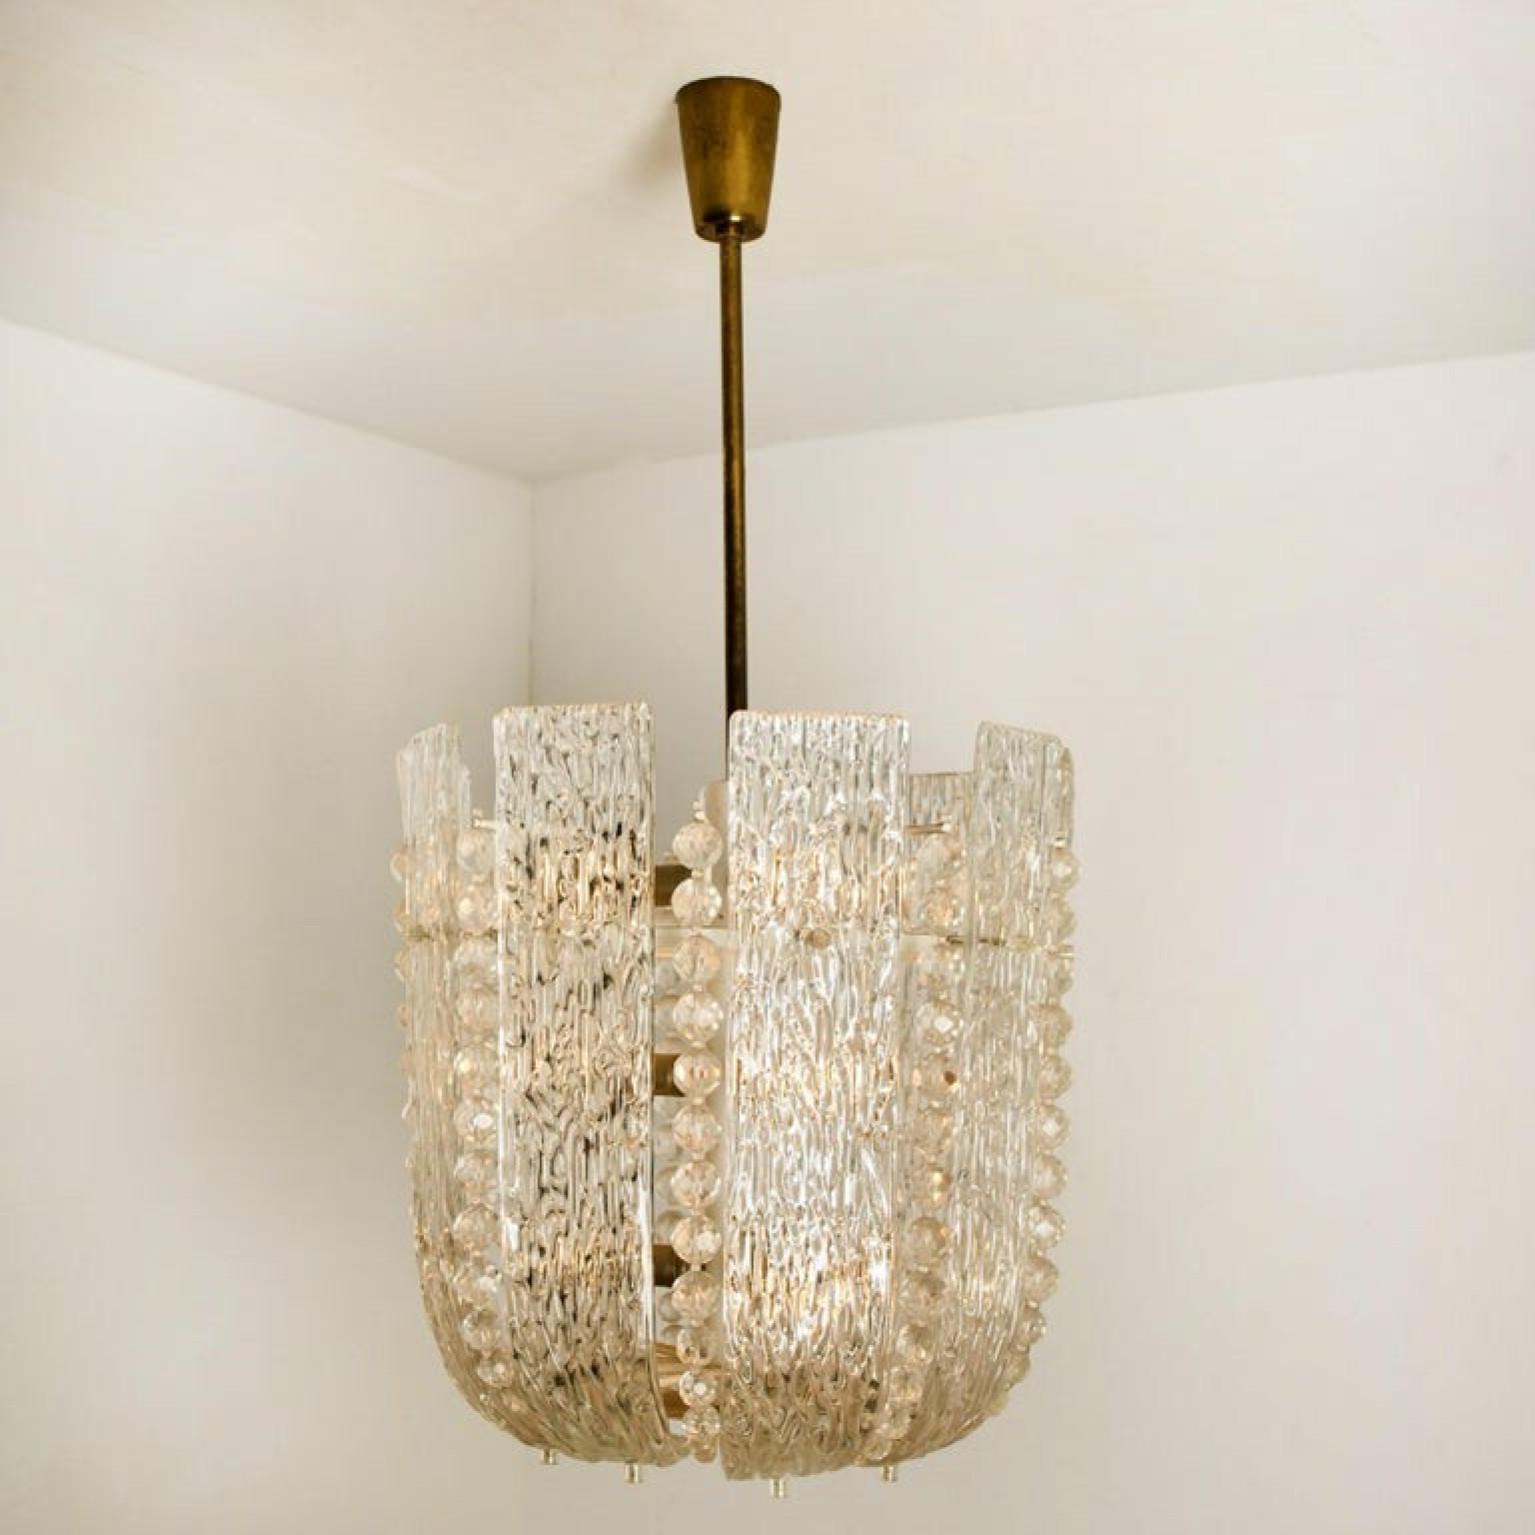 Stunning chandelier by Kalmar composed of large textured glass slabs and crystal pearls on an enameled brass hardware.

The glass has a beautiful wave pattern, what gives a nice diffuse light effect and a nice pattern on ceiling, walls and